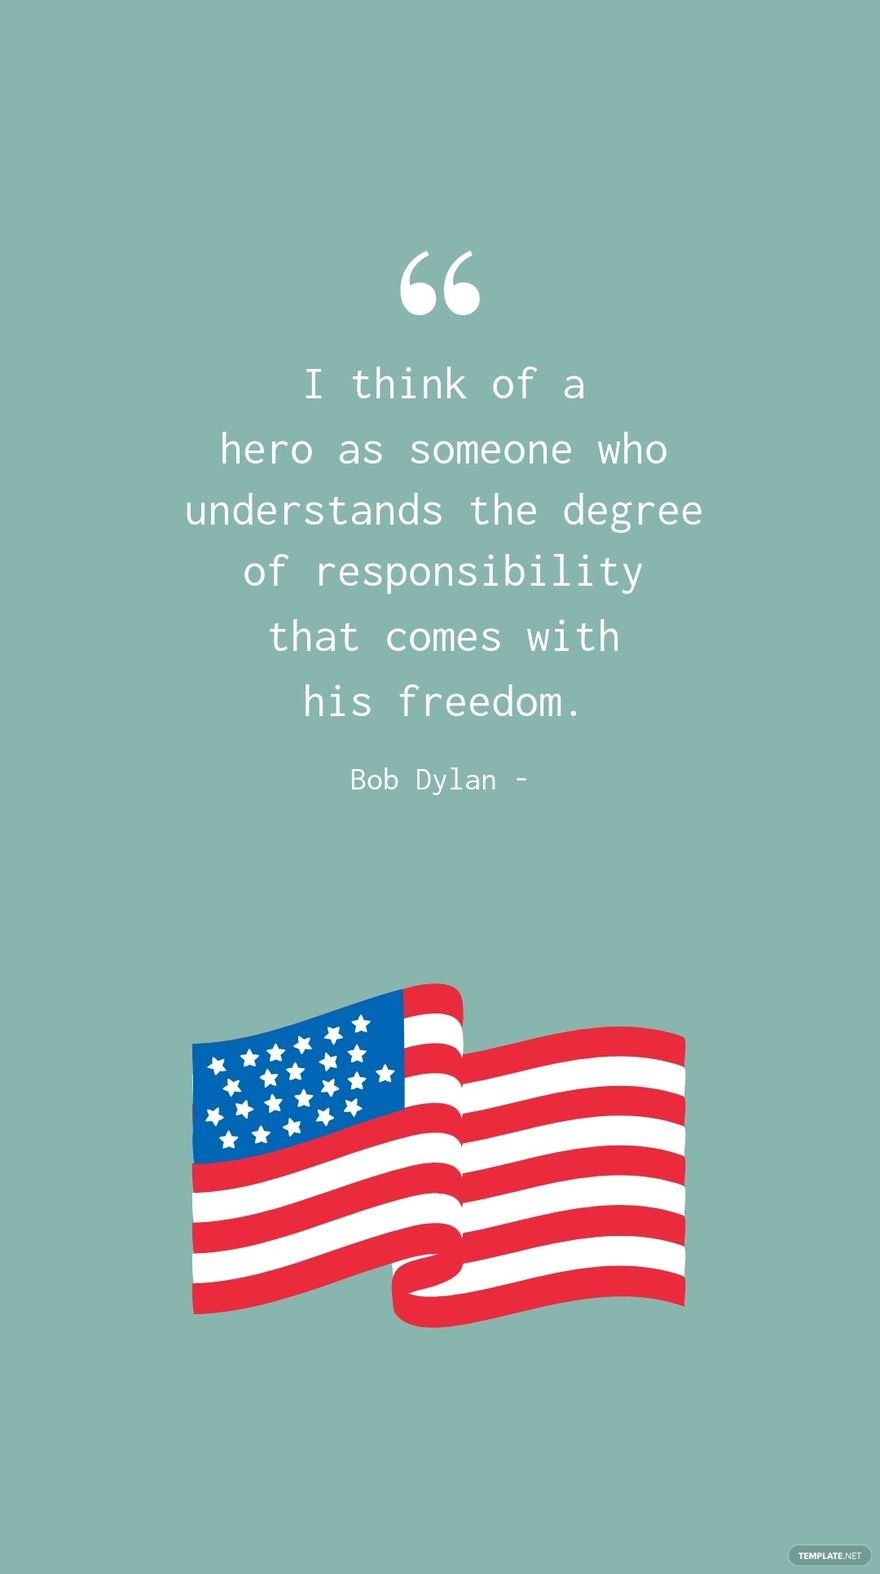 Bob Dylan - I think of a hero as someone who understands the degree of responsibility that comes with his freedom.